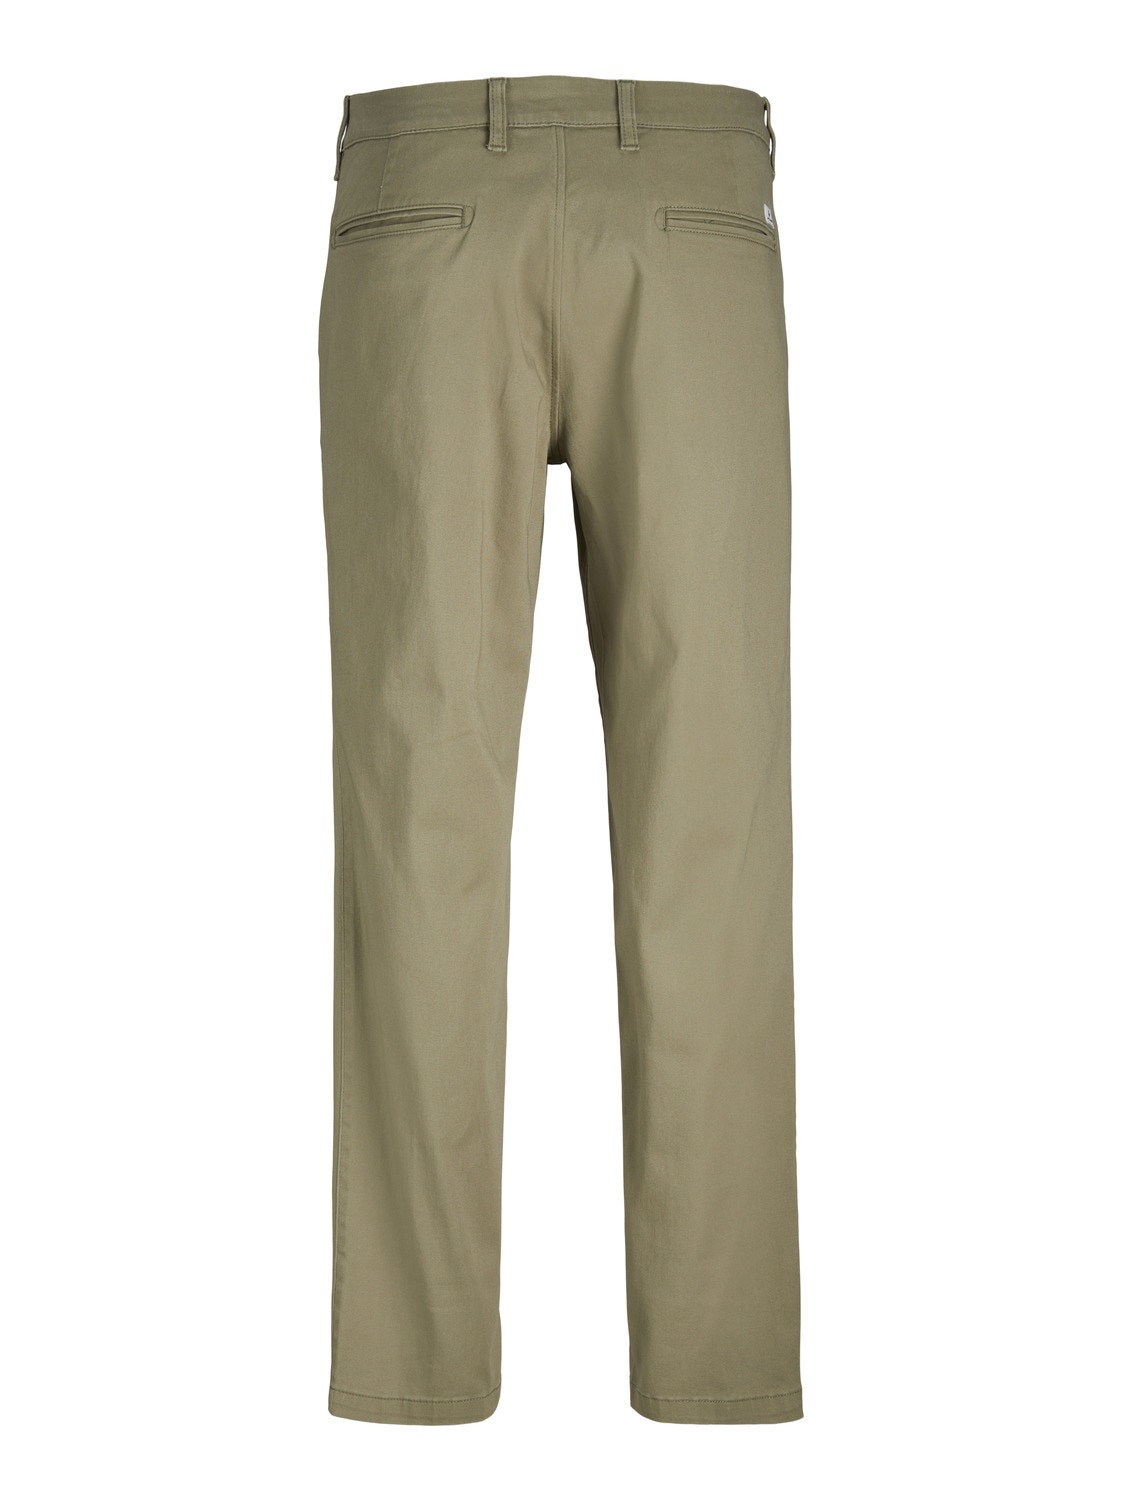 Jack & Jones Παντελόνι Relaxed Fit Chinos -Oil Green - 12212936